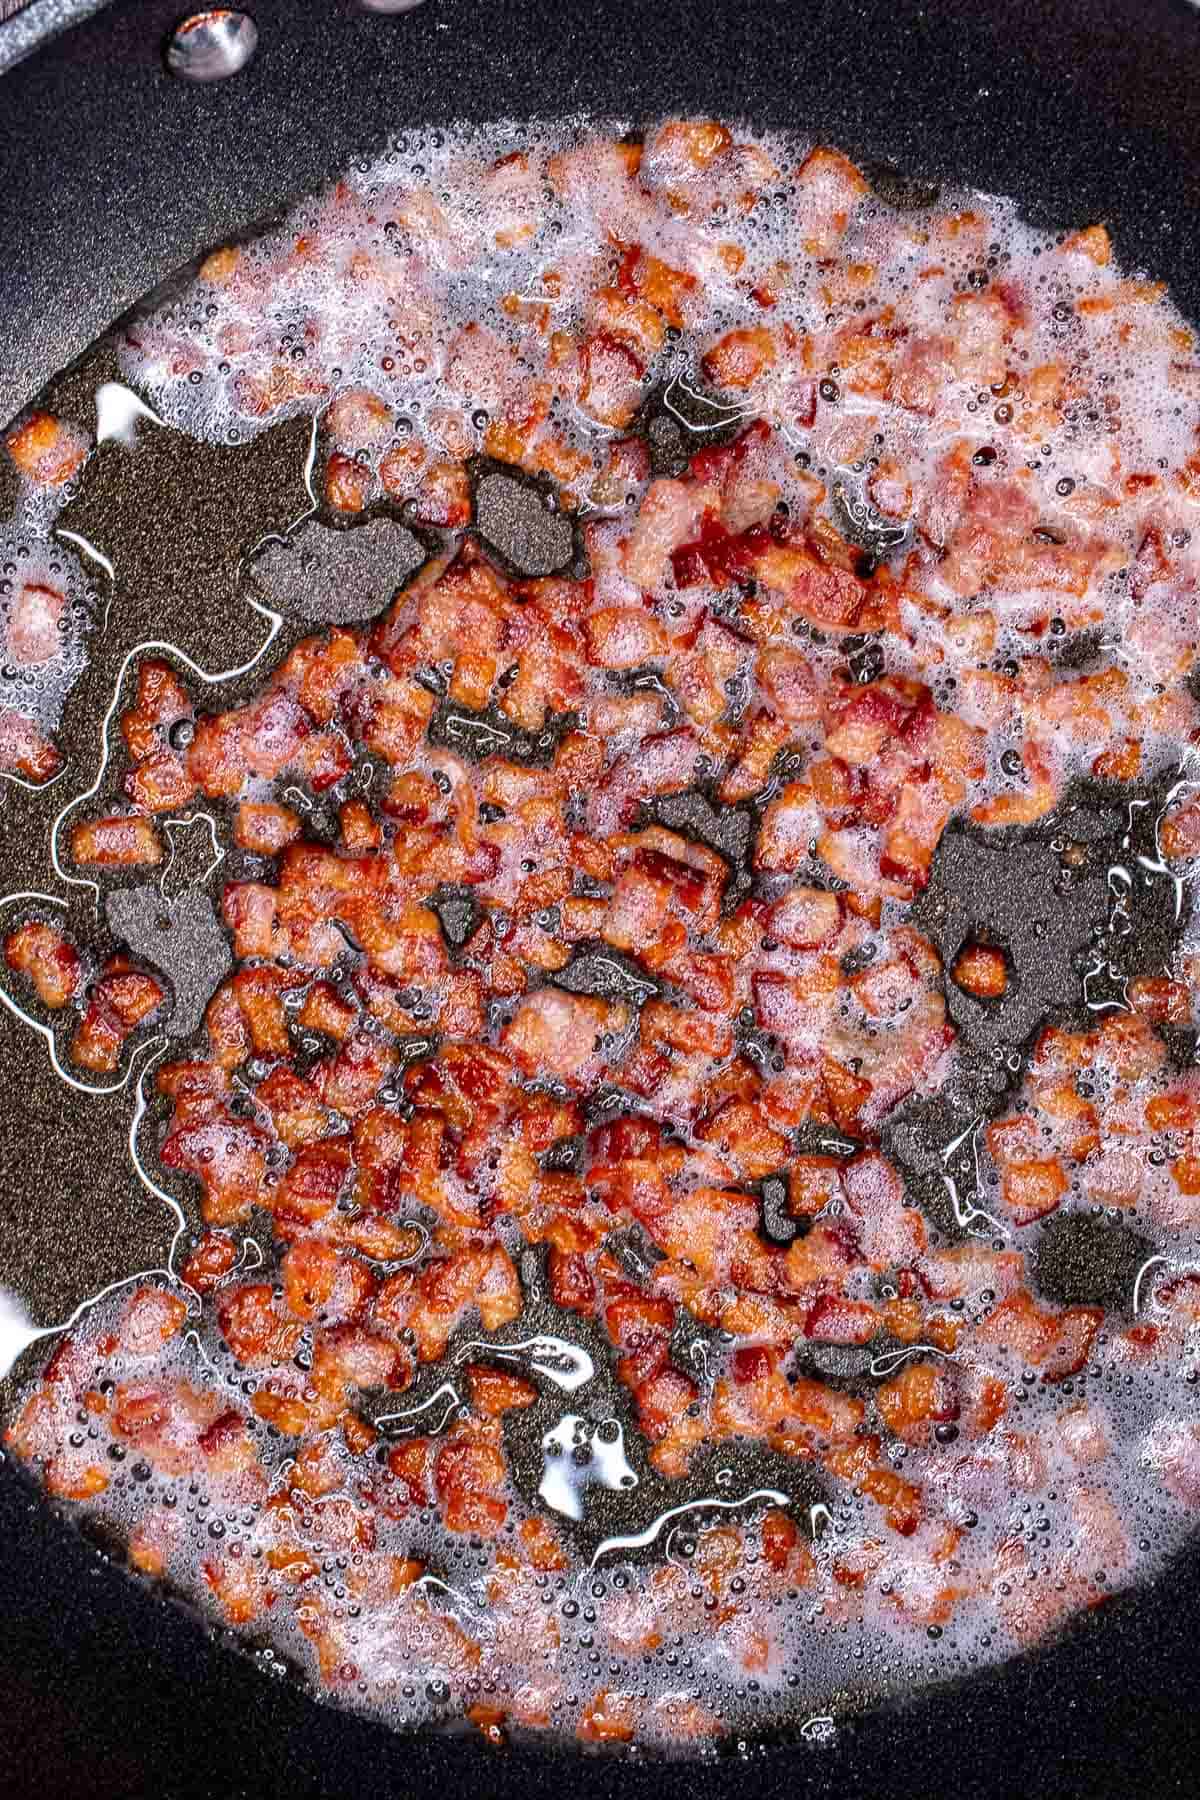 Diced bacon cooked in a skillet.